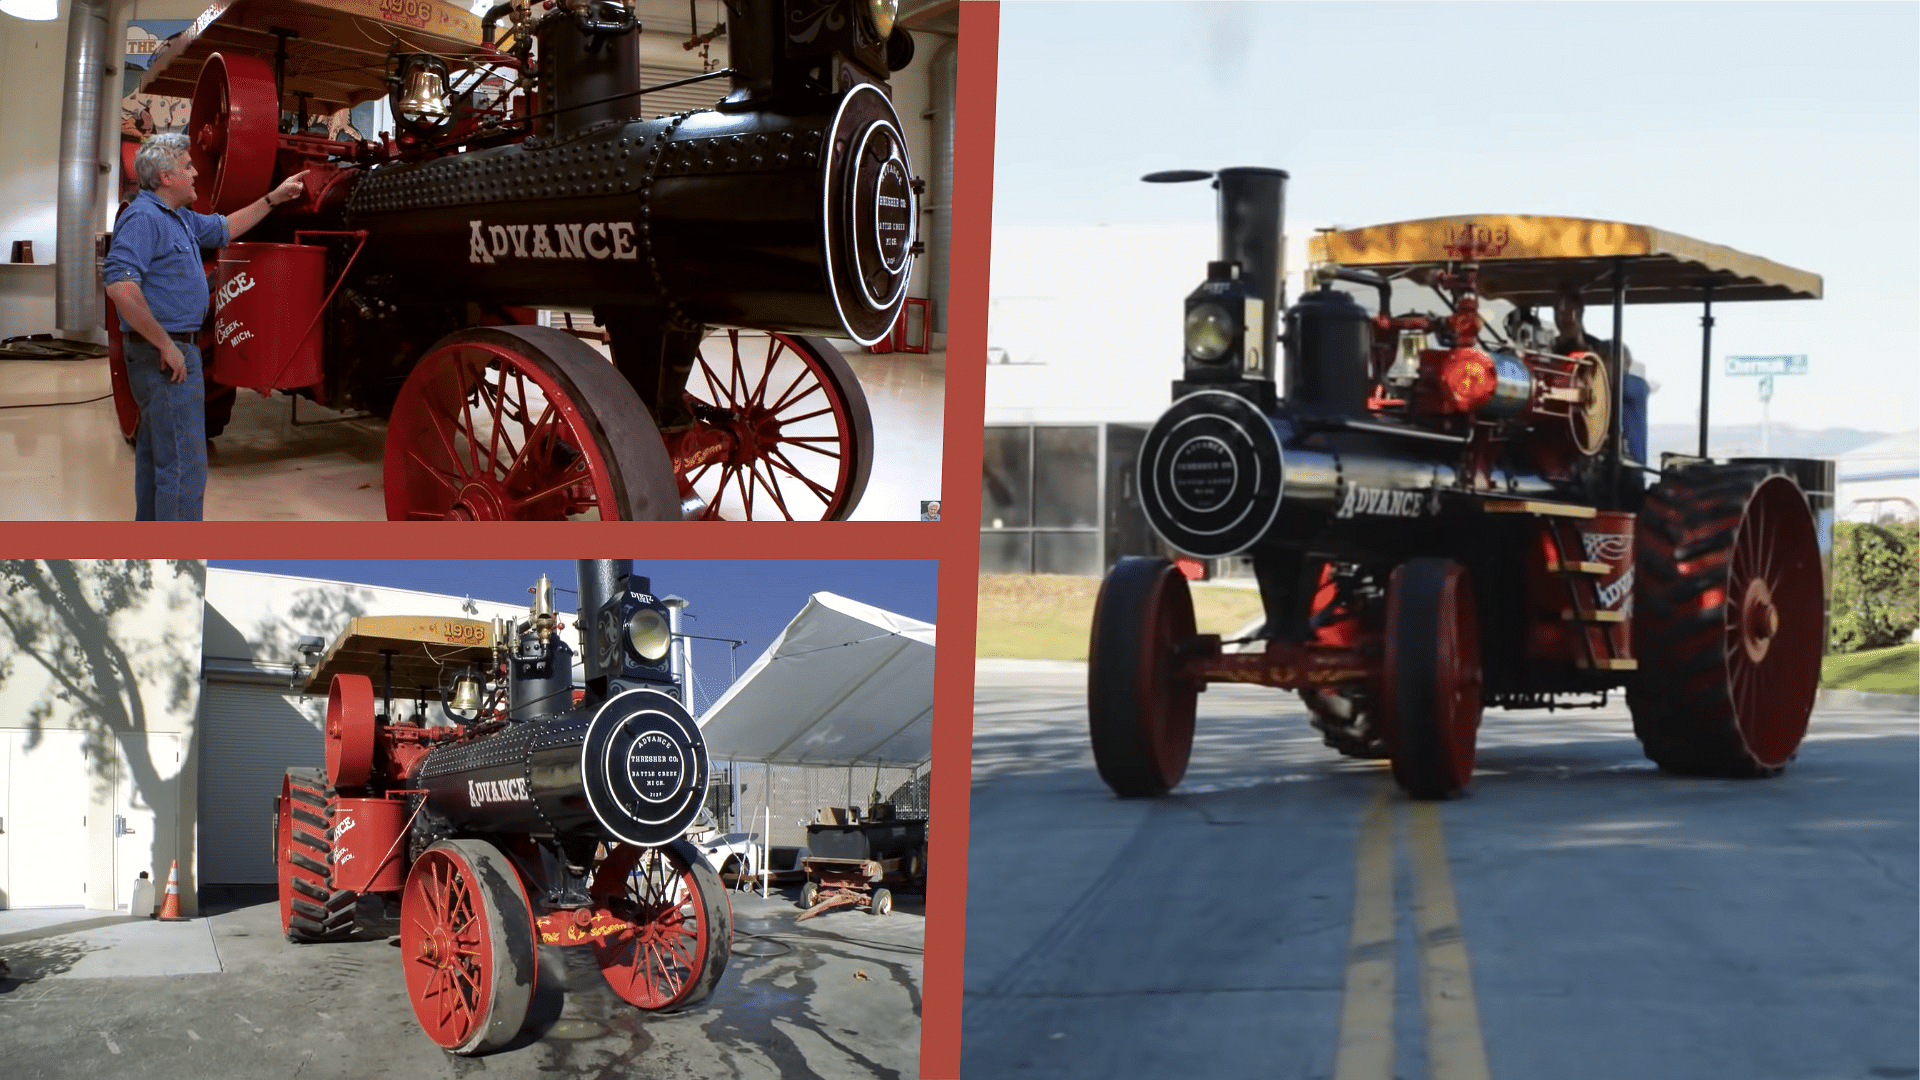 Jay Leno's 1906 Advance Steam Traction Engine